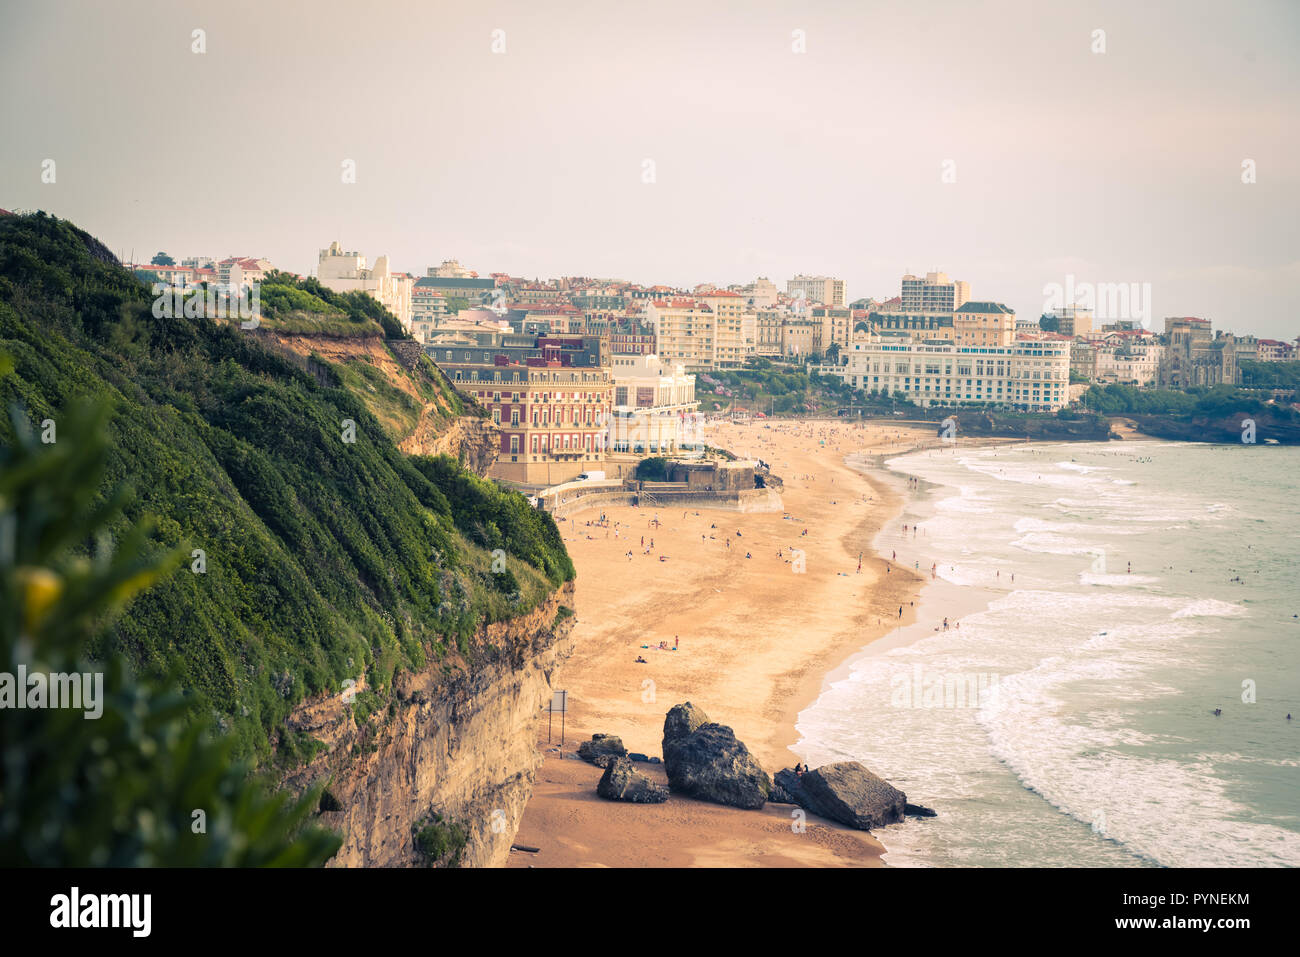 Biarritz , France . Biarritz city and its famous sand beaches - Miramar and La Grande Plage, Bay of Biscay, Atlantic coast, France Stock Photo